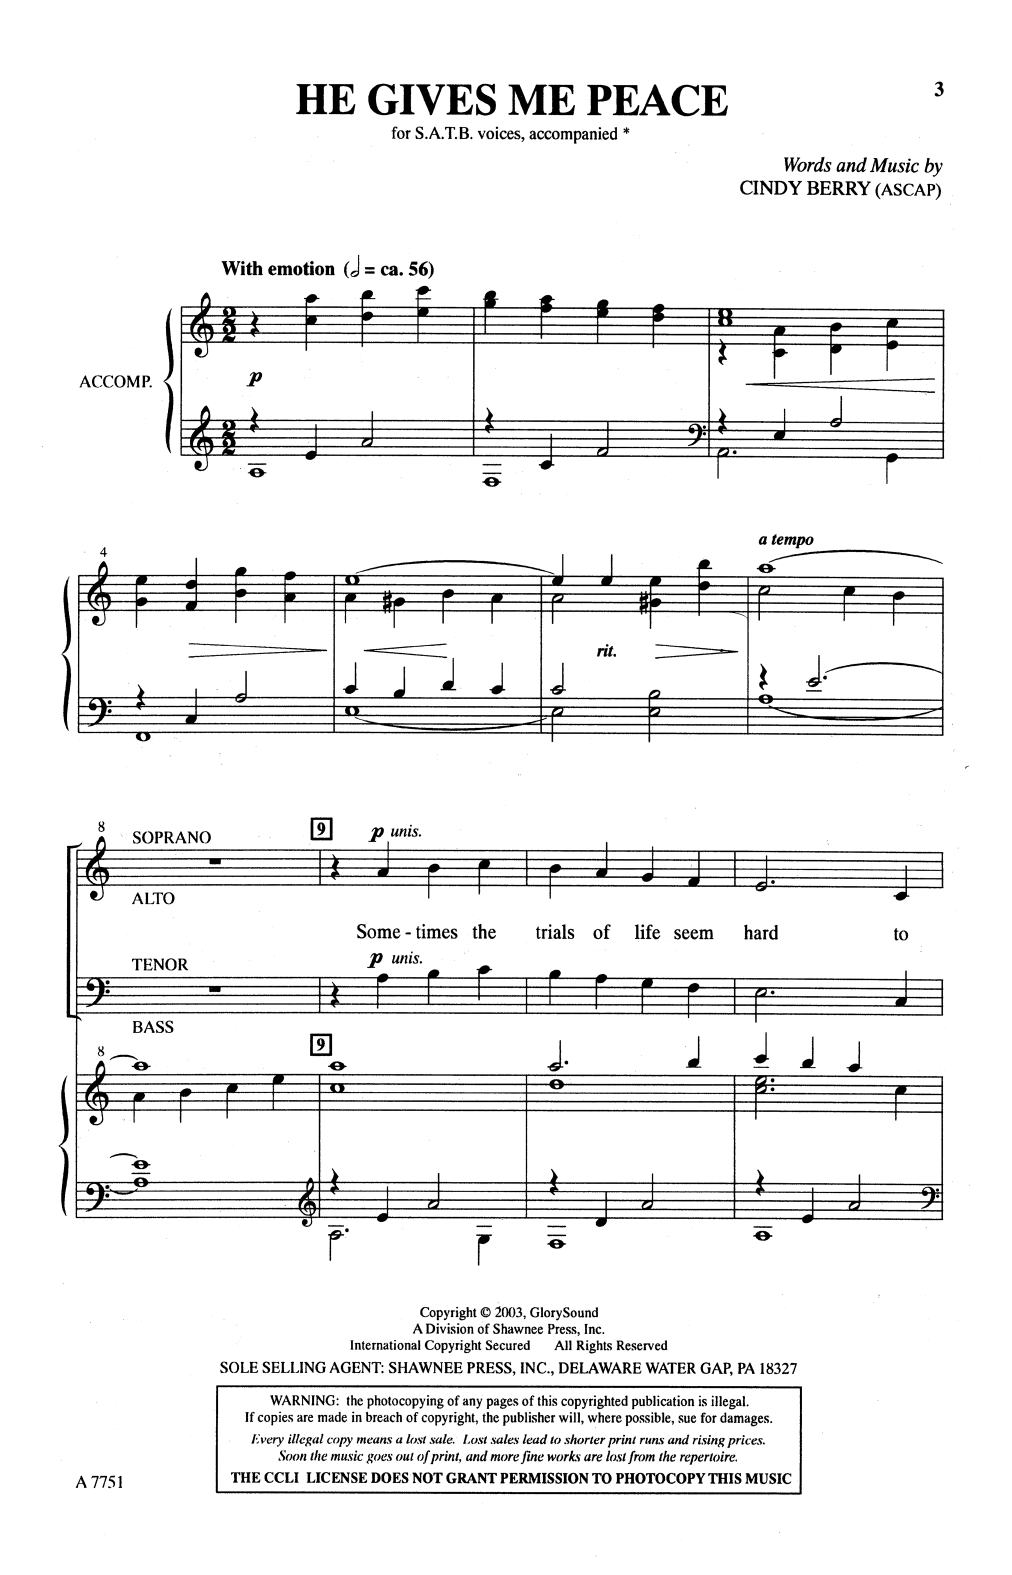 Download Cindy Berry He Gives Me Peace Sheet Music